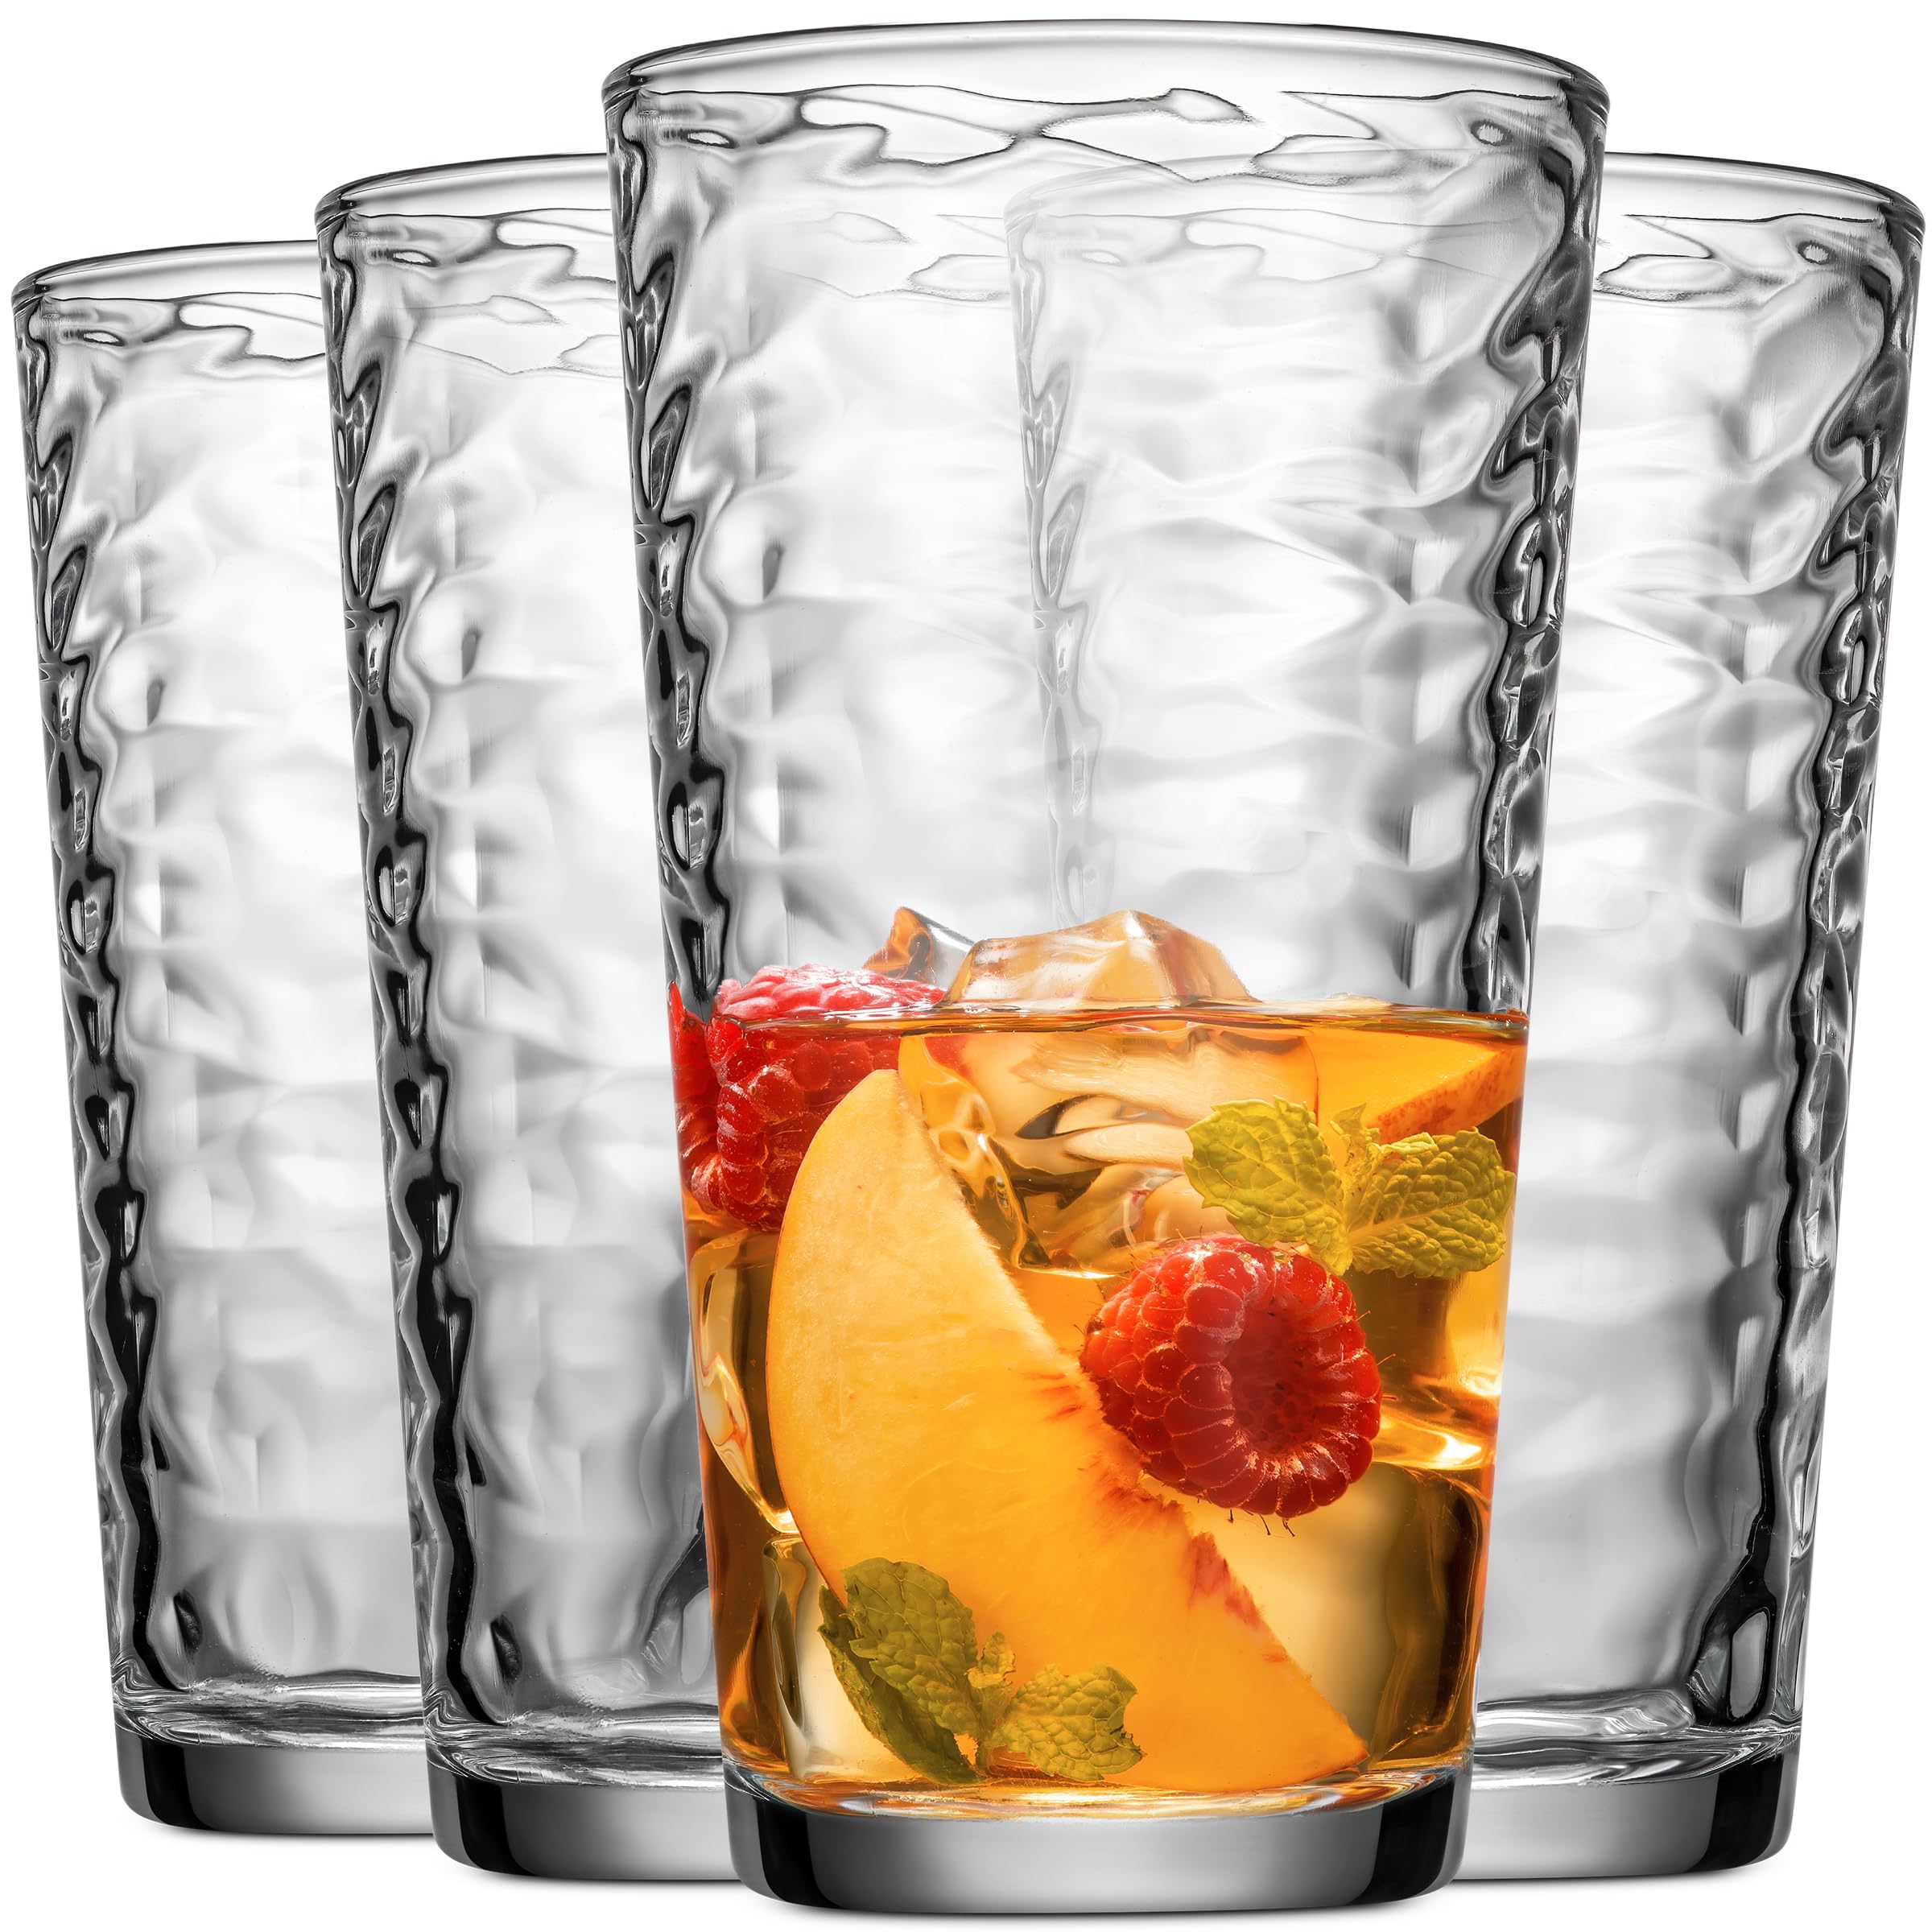 Glaver's Drinking Glasses Set of Glass Cups, 17 Oz. Basic Cooler Glassware, ideal for Water, Juice, Cocktails, Iced Tea and more. Dishwasher Safe.  - Like New